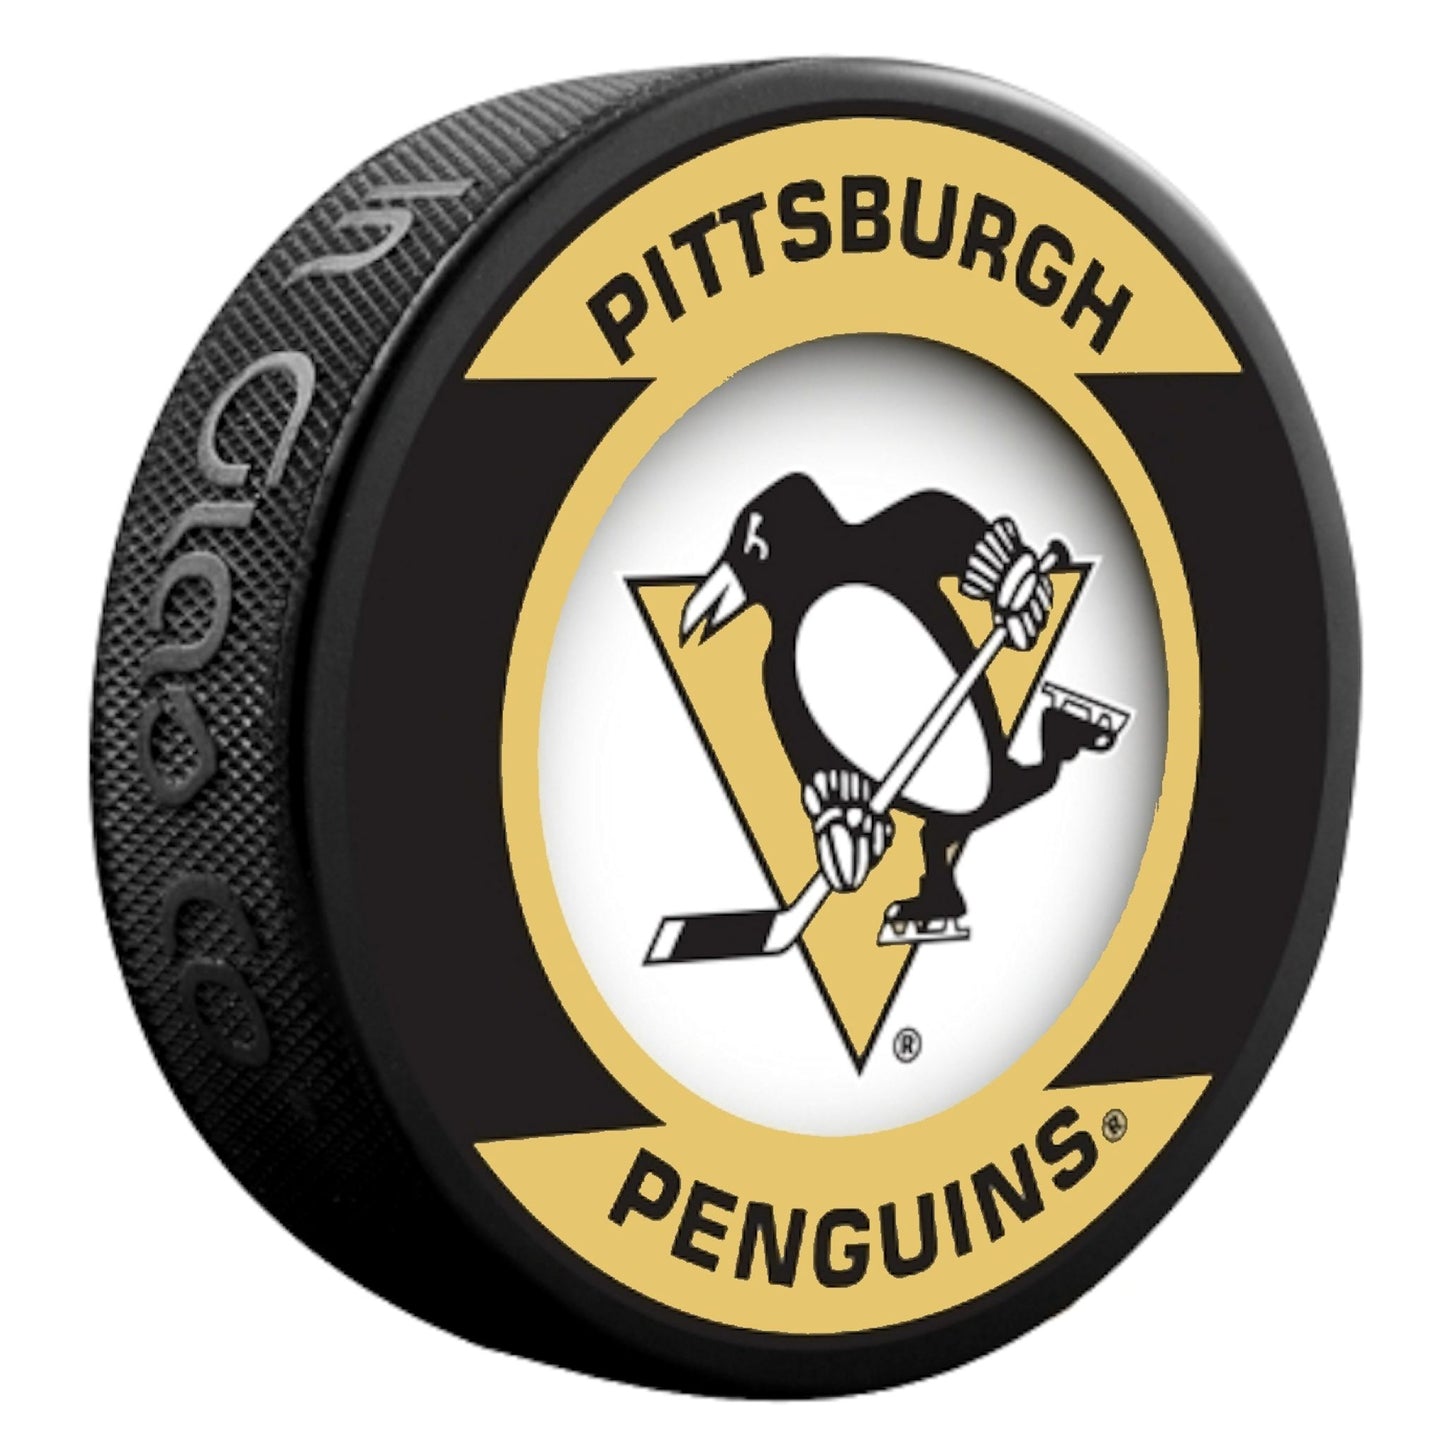 Pittsburgh Penguins Retro Series Collectible Hockey Puck